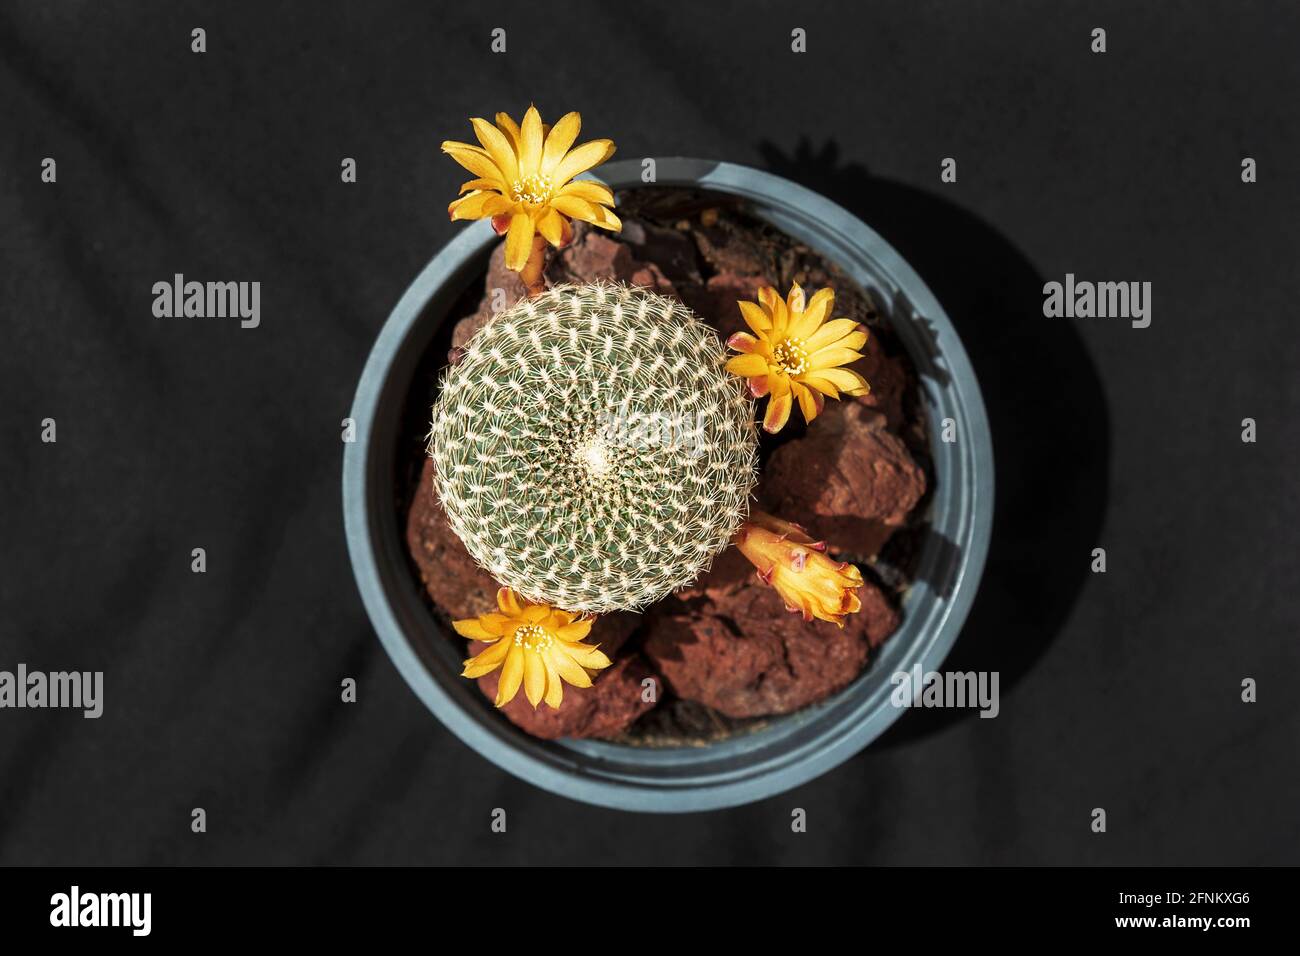 overhead view of a Crown Cactus Sulcorebutia arenacea specimen with three orange flowers and one wilted flower in a nursery pot with dark background Stock Photo